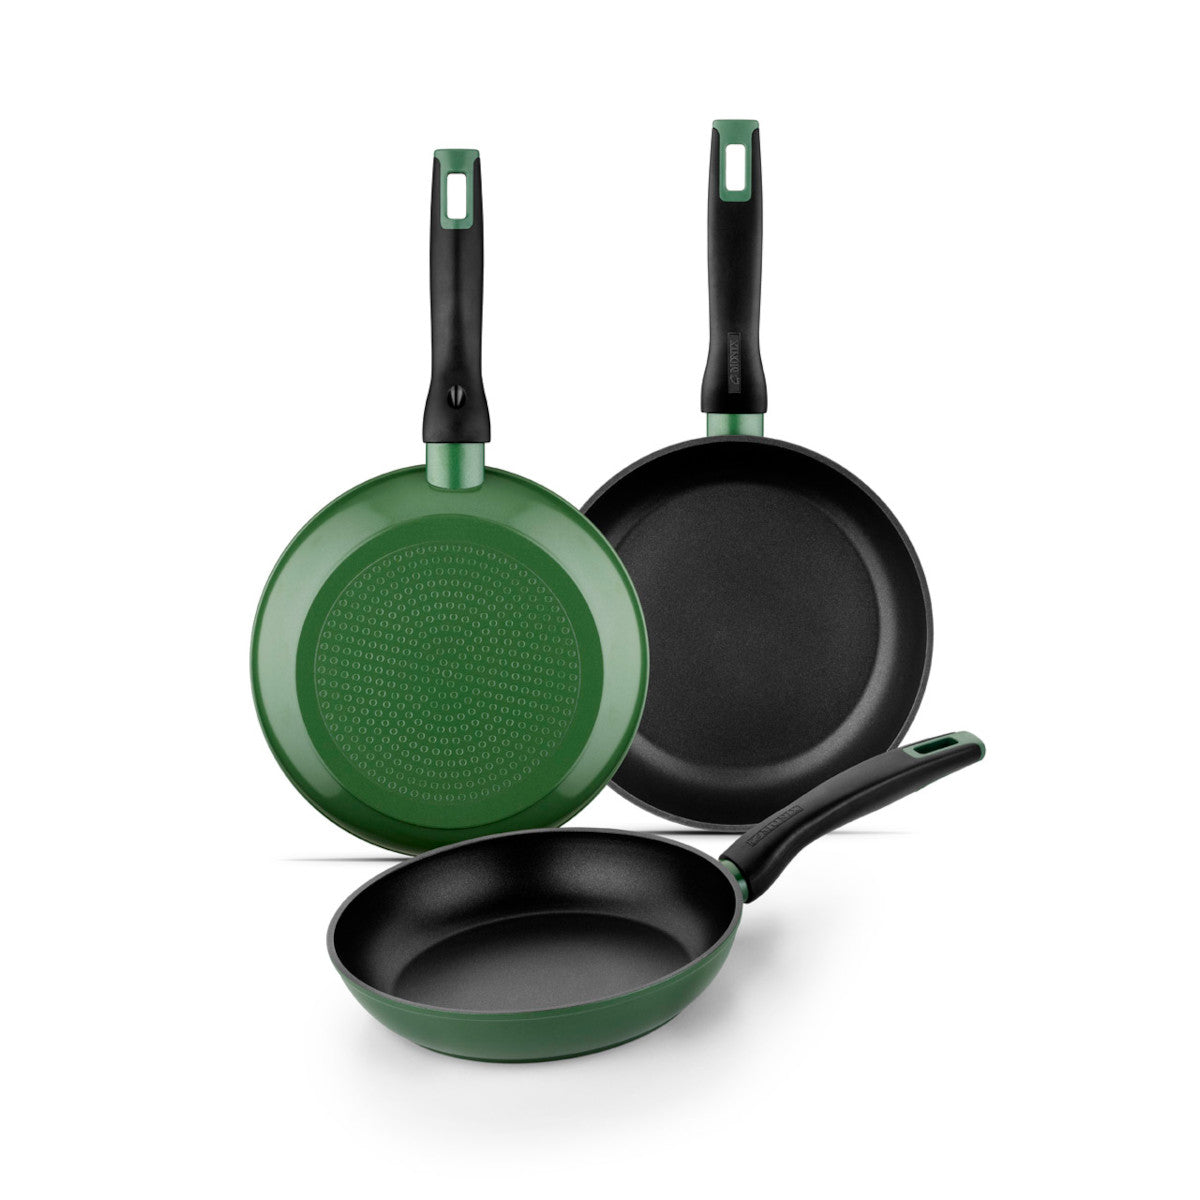 Forest Frying Pan, 3-piece set